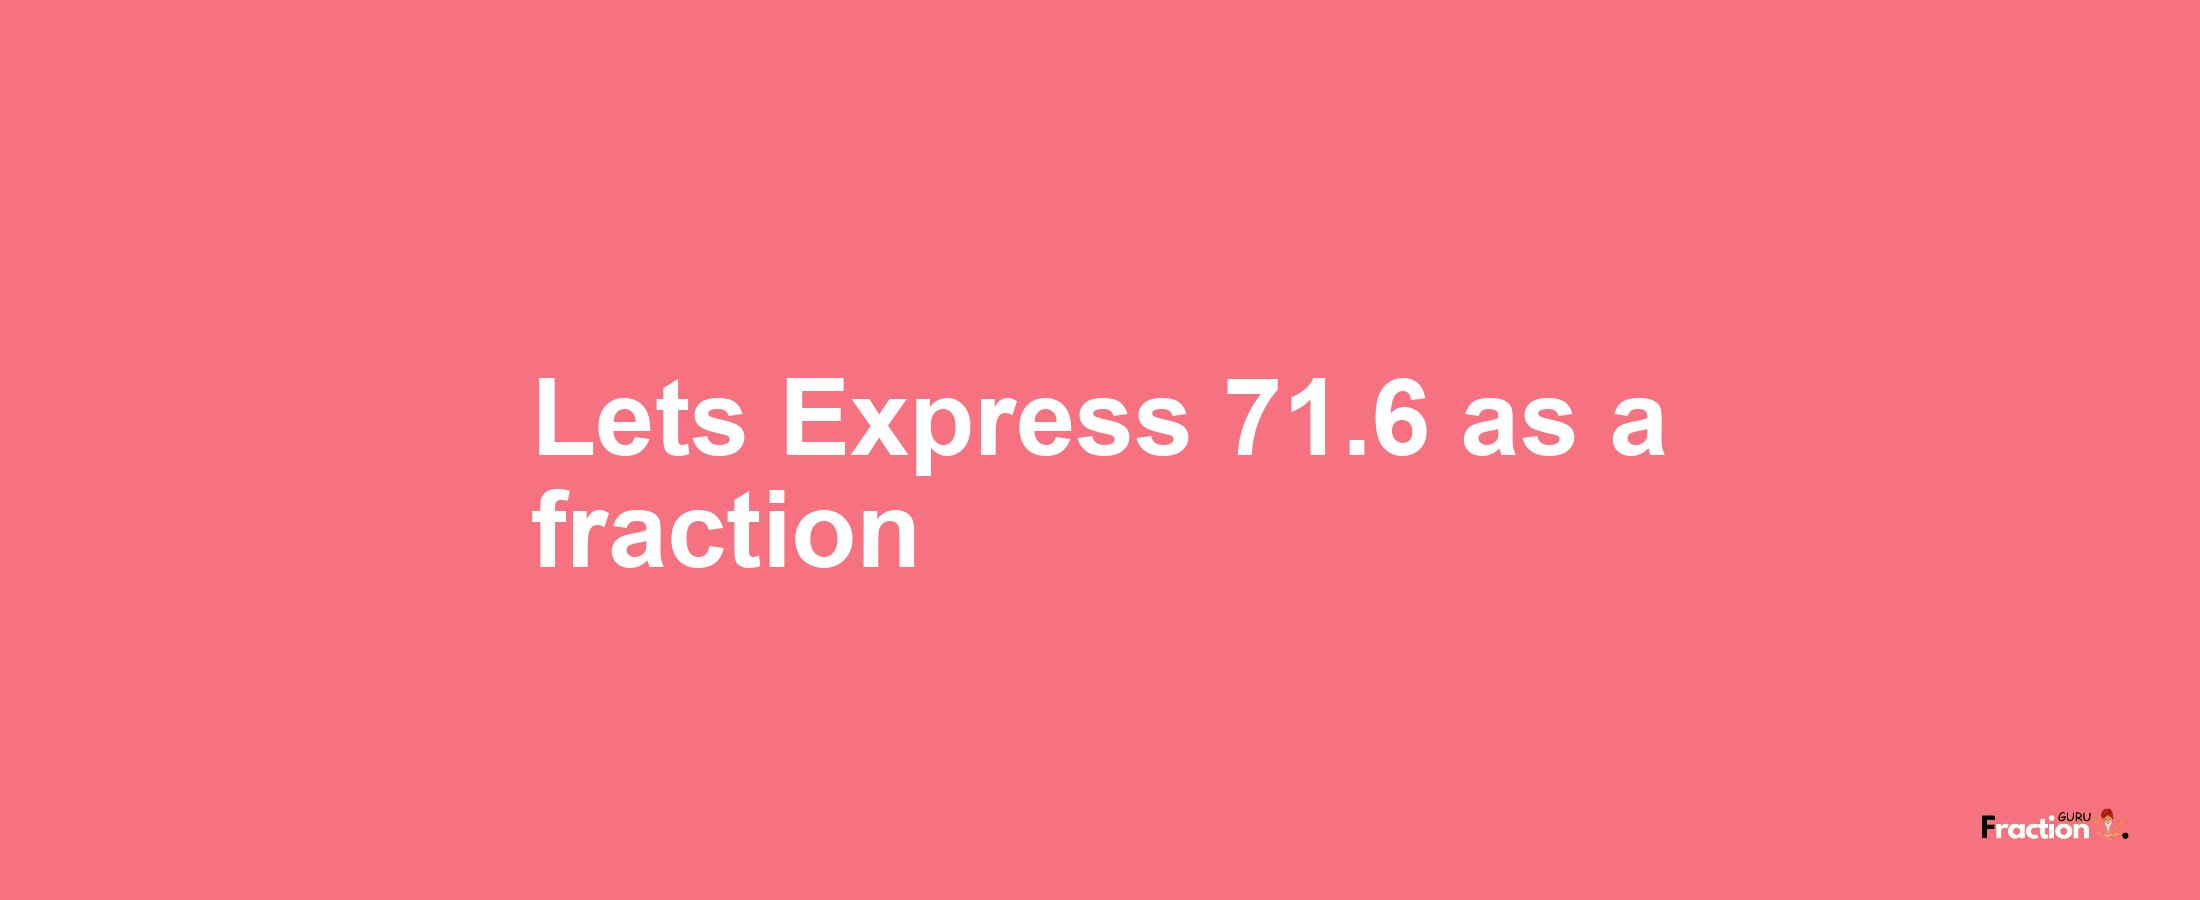 Lets Express 71.6 as afraction